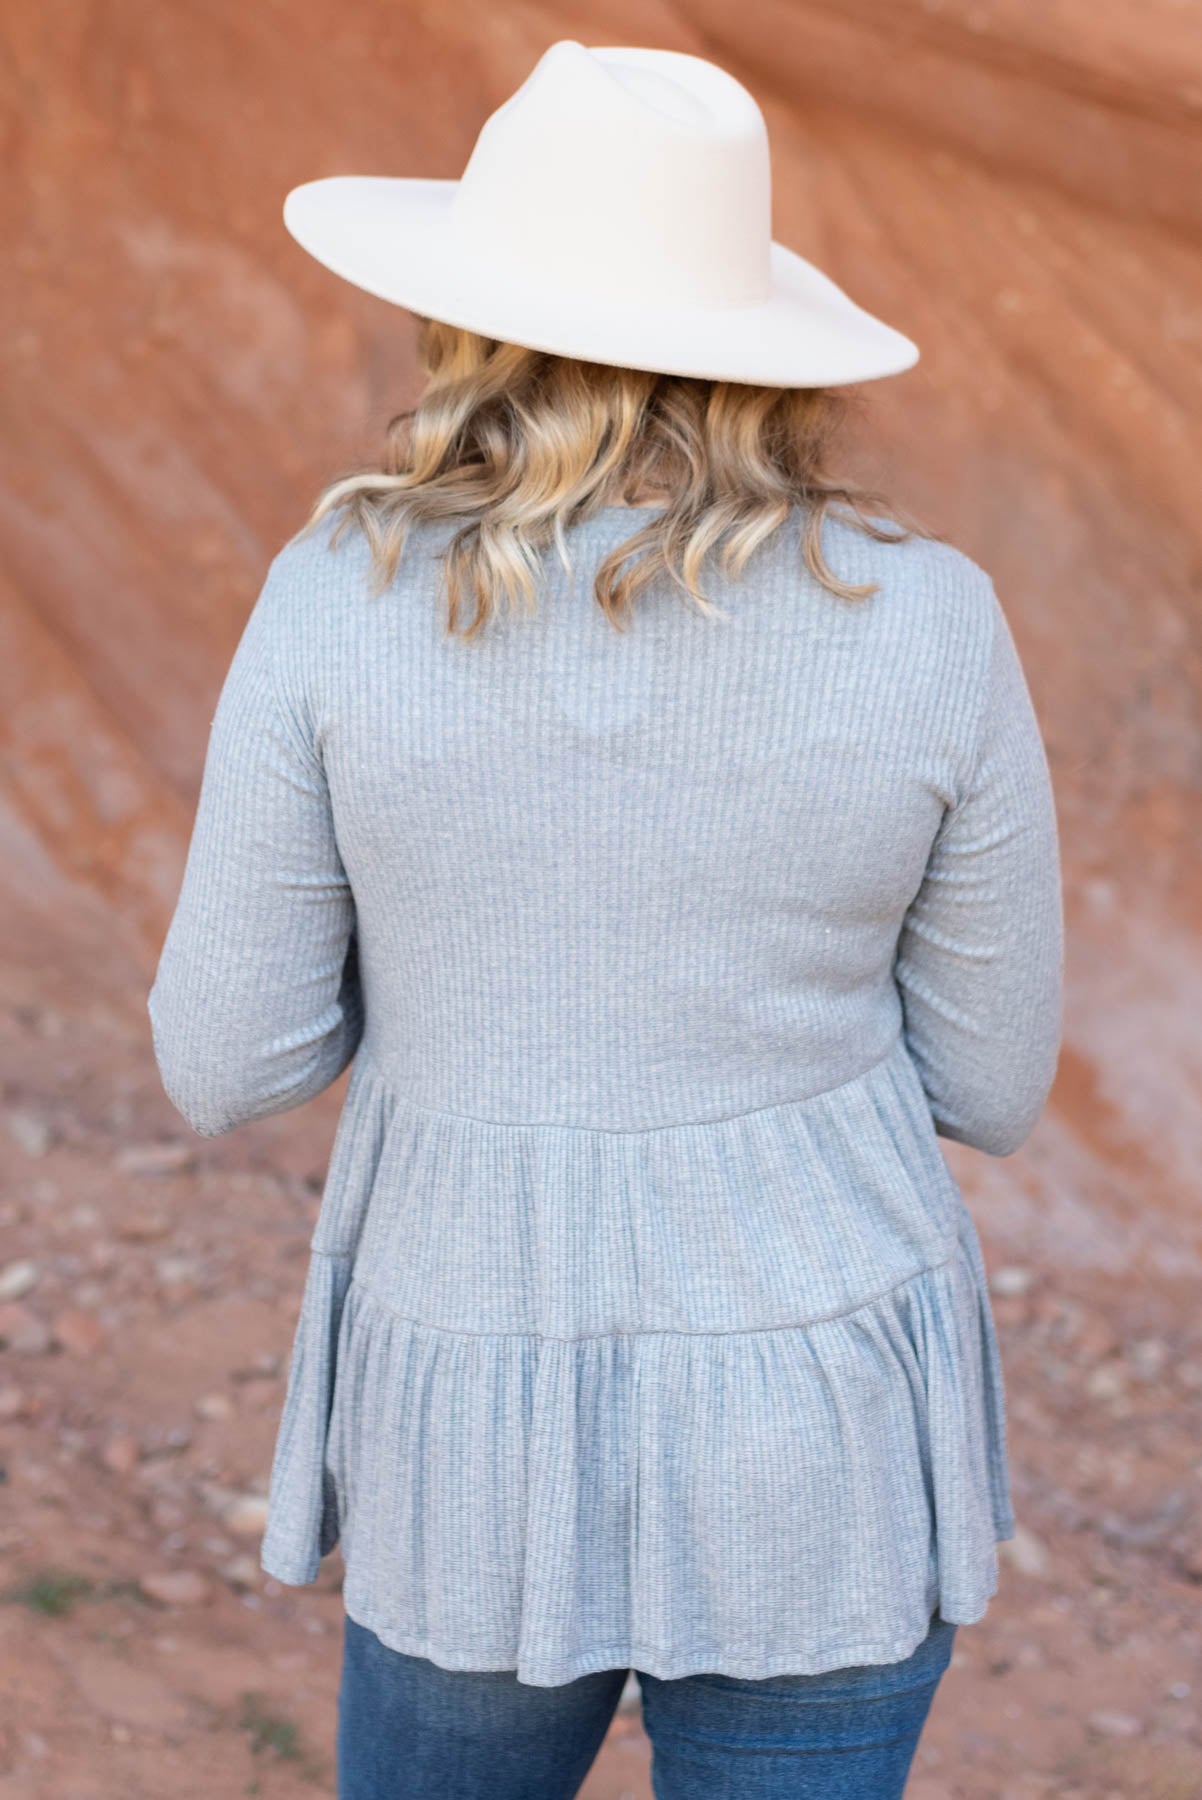 Back view of heather grey top